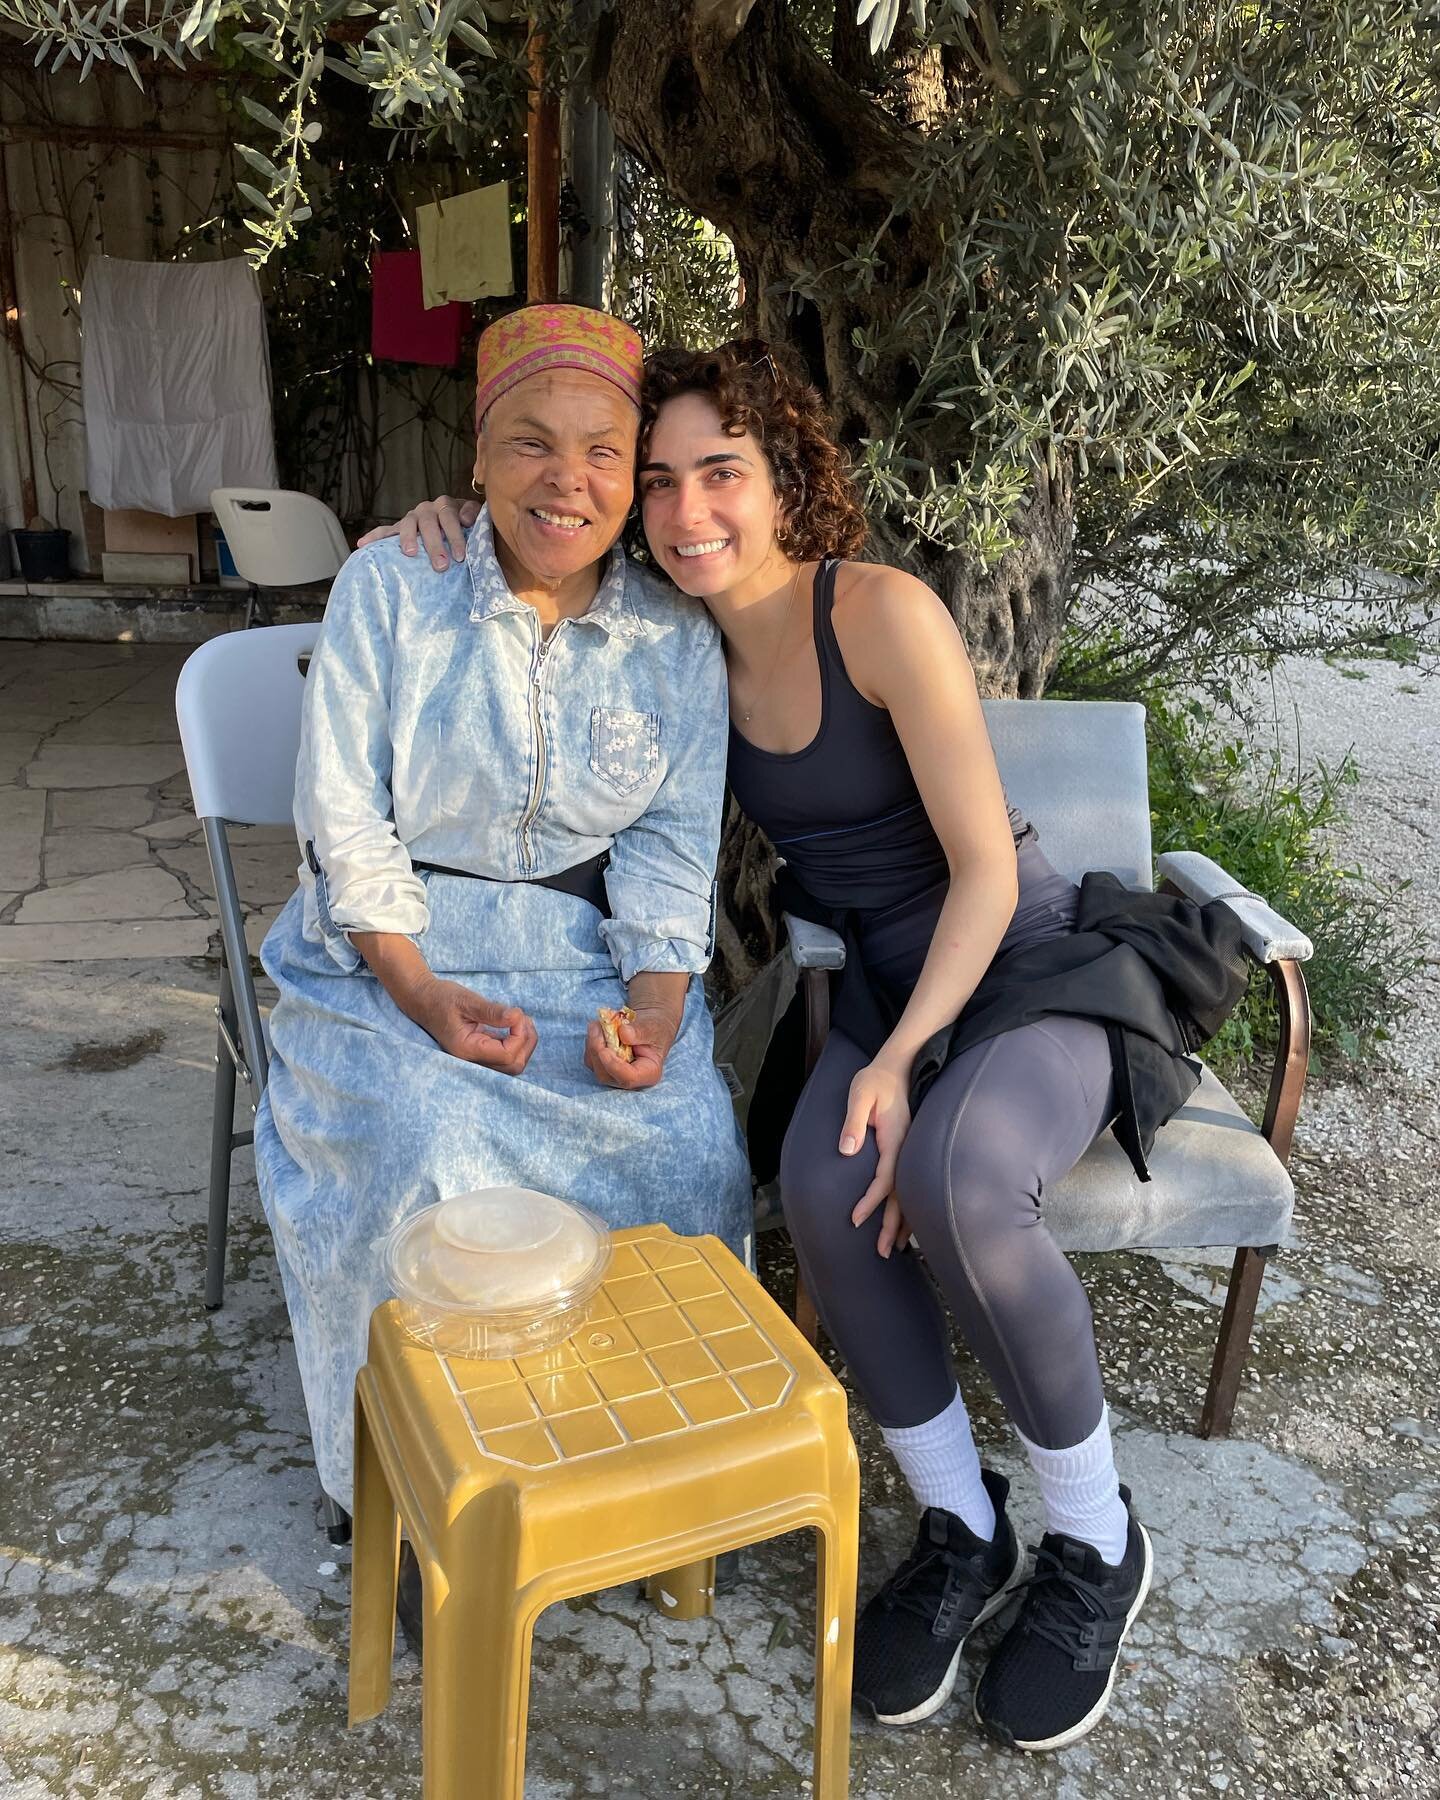 Remember Sabha Asmar? Sabha is a blind woman we have been supporting in Beit Jala, Palestine. Our on ground rep and regional representative got the honor to visit her this past month. Sabha wants you all to know that she is very grateful for all the 